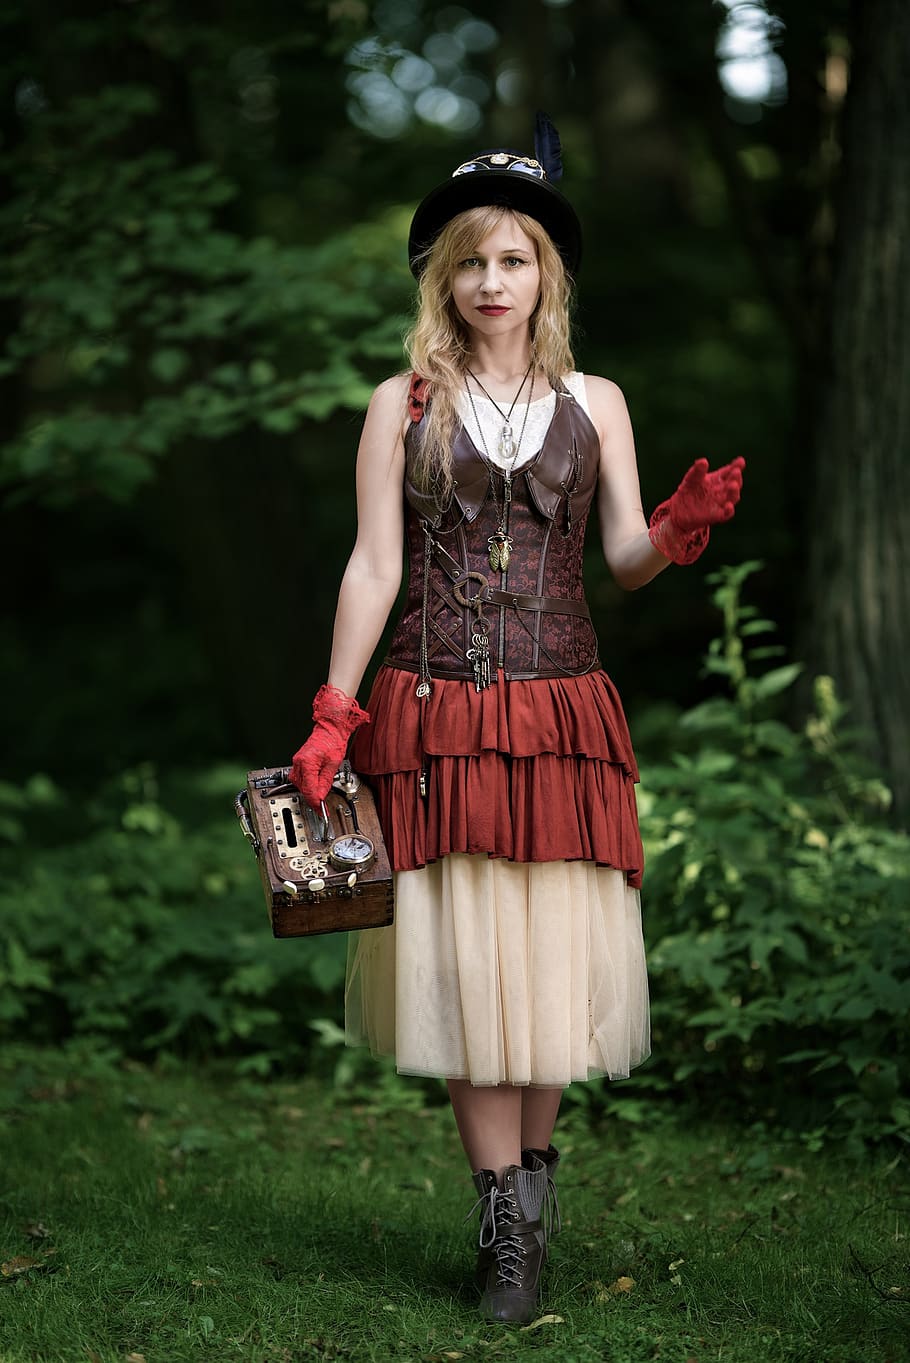 steampunk, forest, girl, woman, chest, mechanic, parabank, corset, 18th century, cosplay